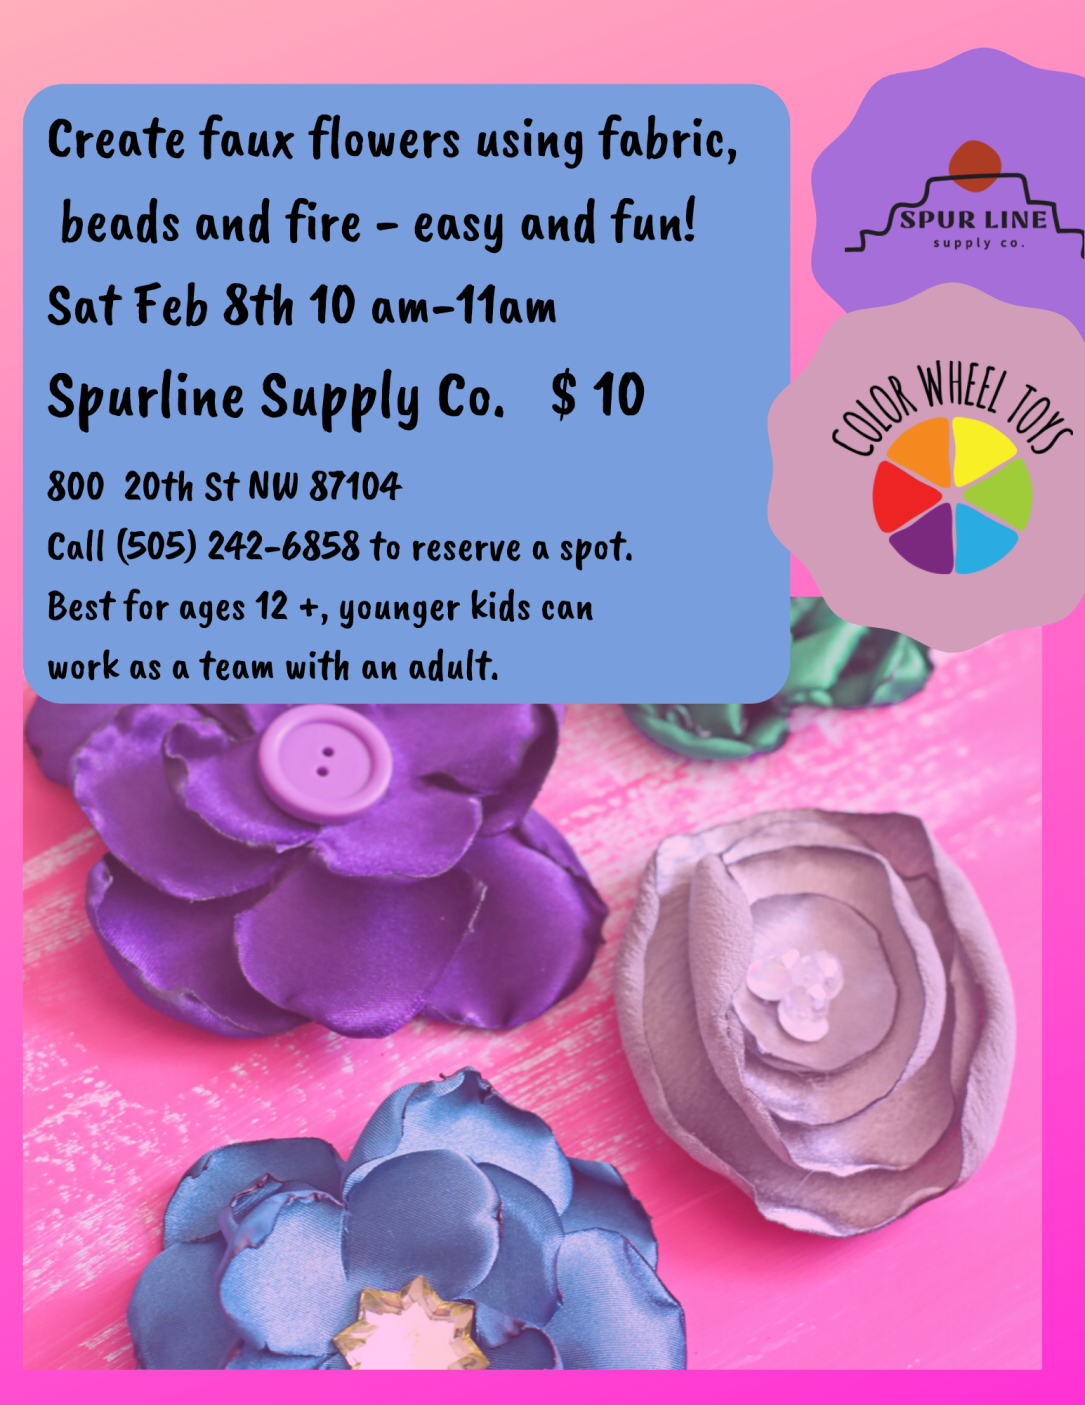 Create faux flowers using fabric, beads and fire! Sat Feb 8th 10 am-11am Spurline Supply Co 800 @0th St NW 87104 Call (505) 242-6858 to reserve a spot. Best fr ages 12 +, younger folks can work as a team with an adul